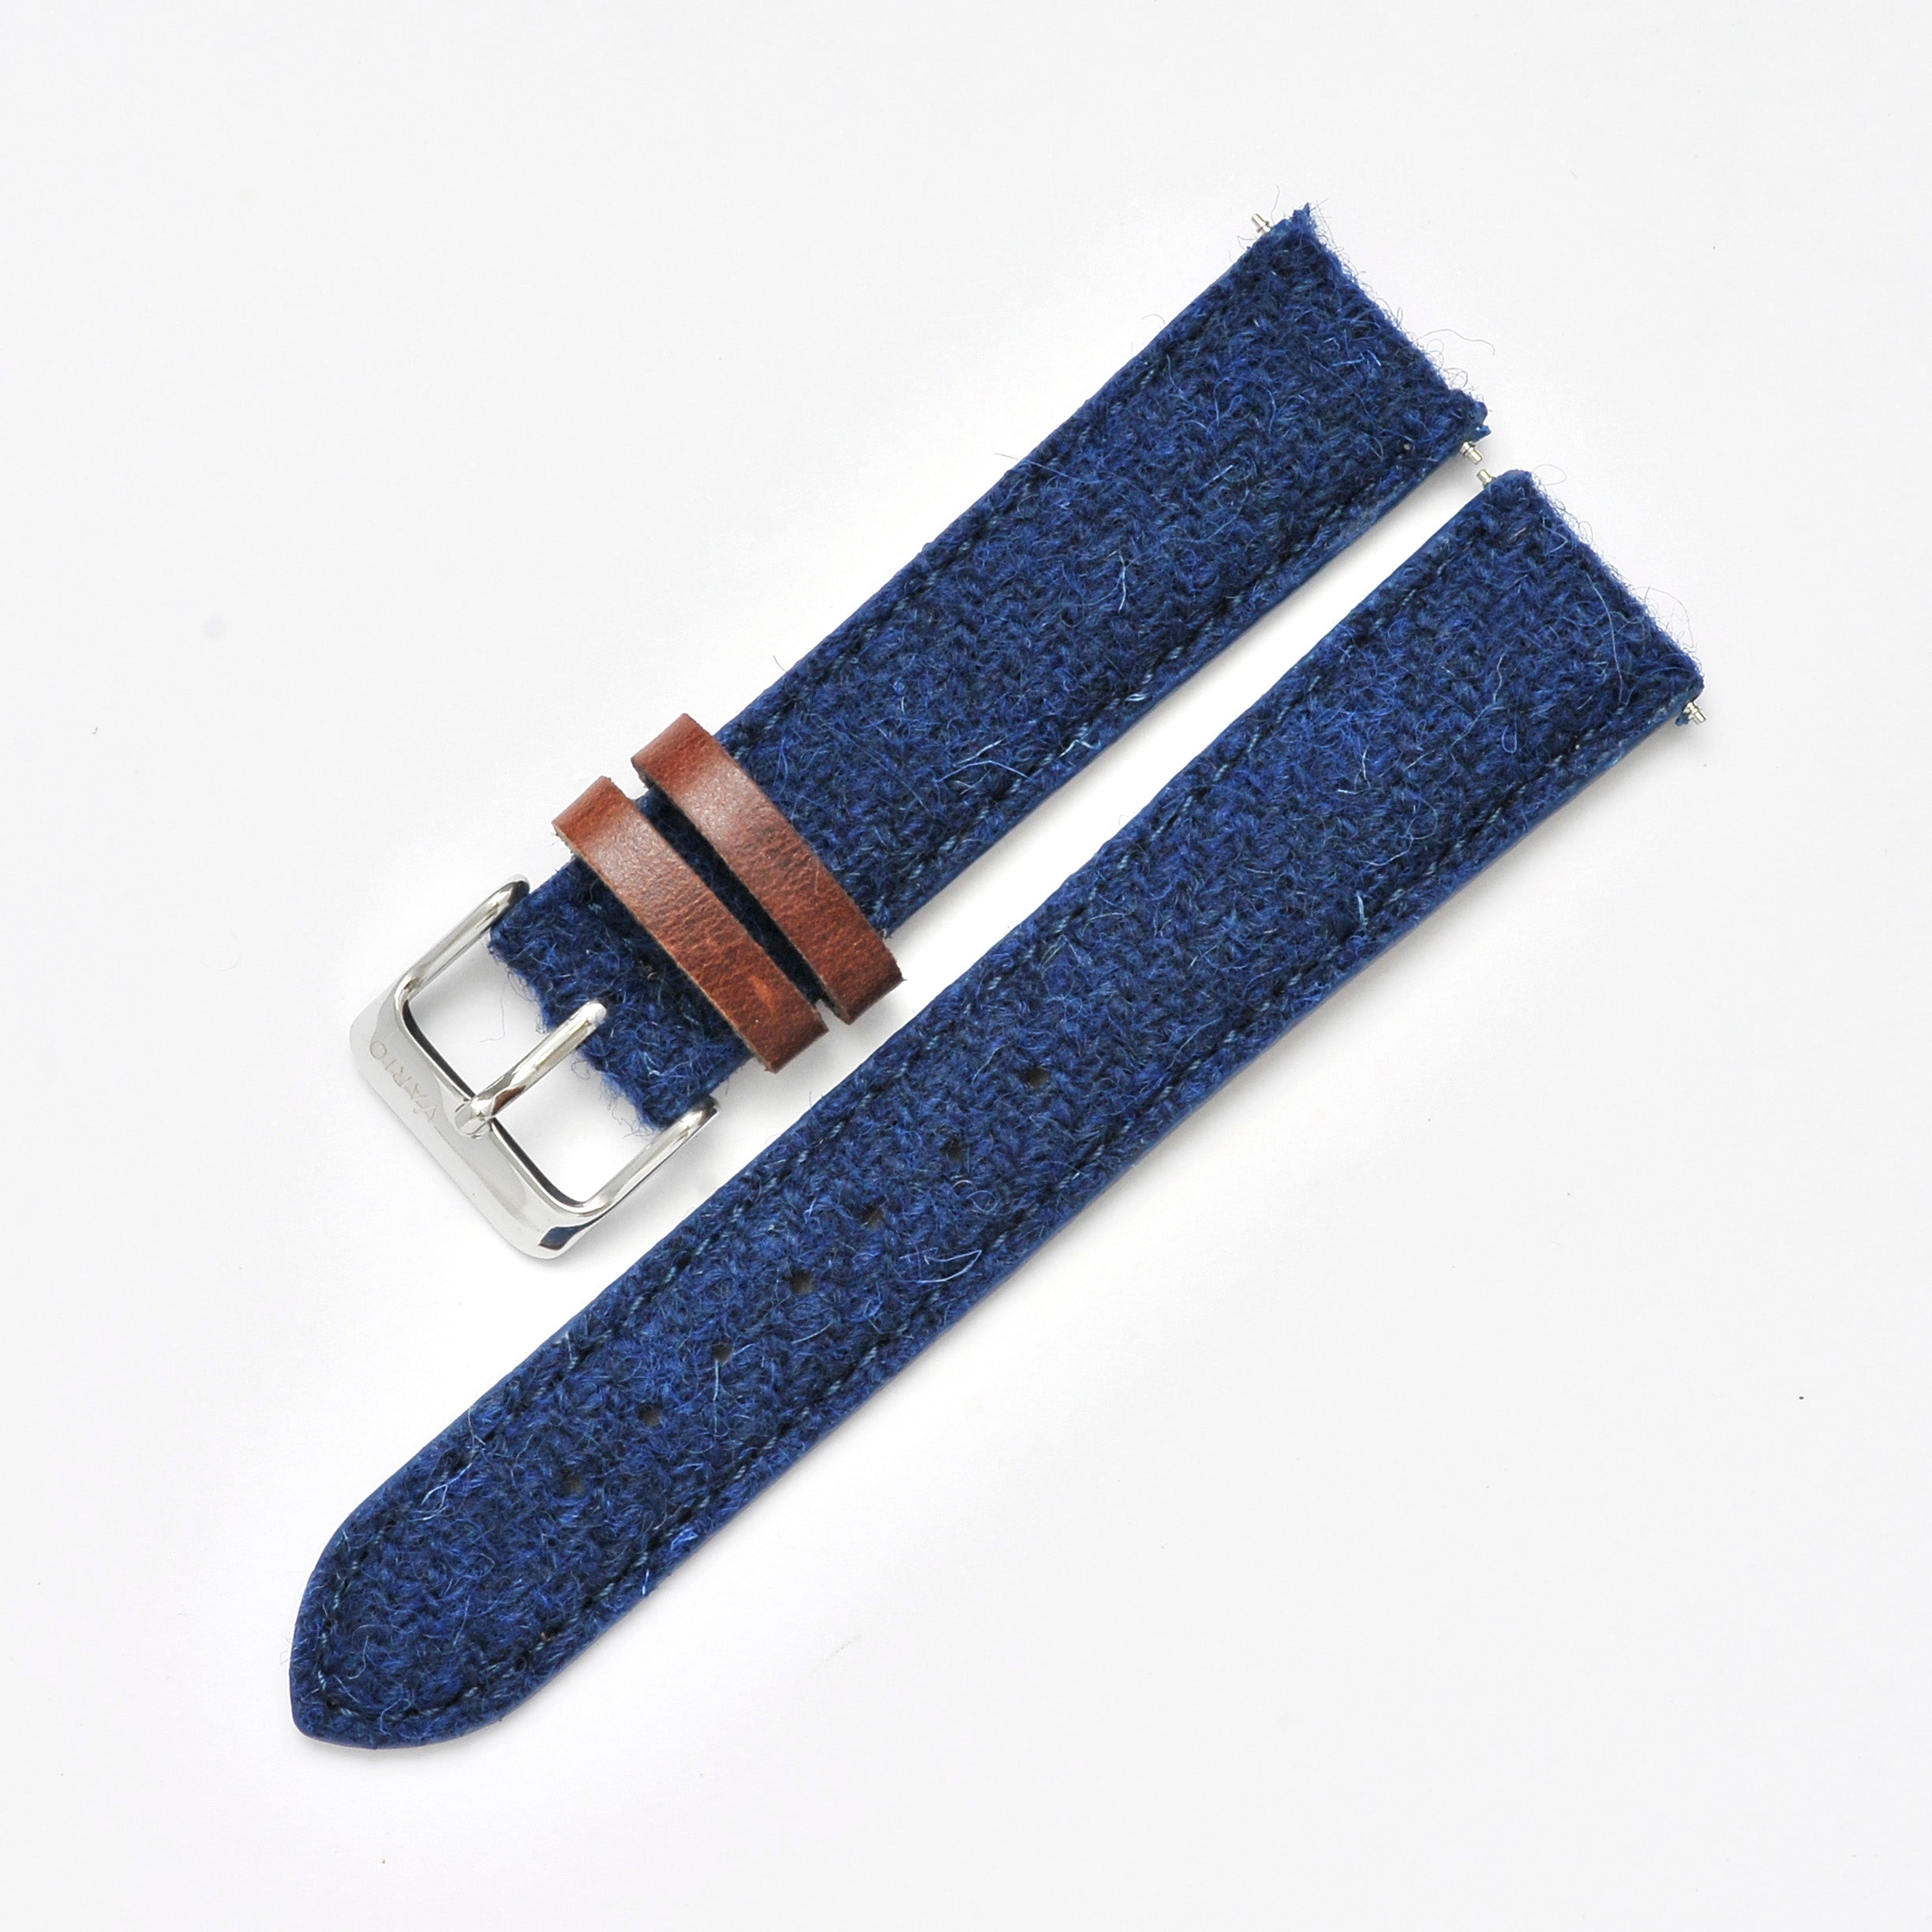 vario harris tweed with leather keepers watch strap blue